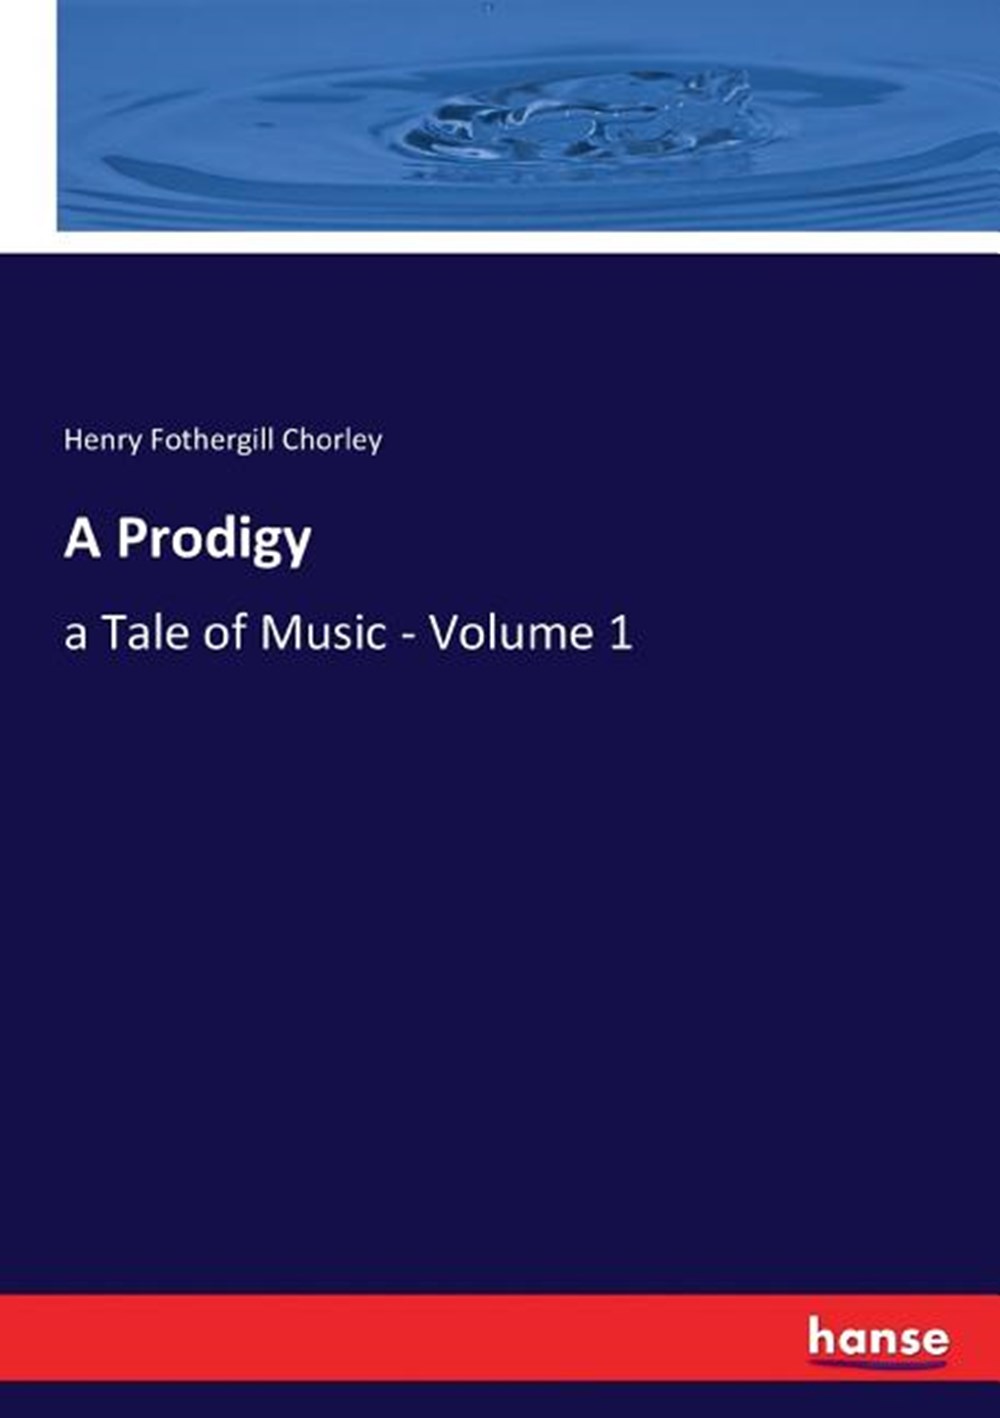 Prodigy: a Tale of Music - Volume 1